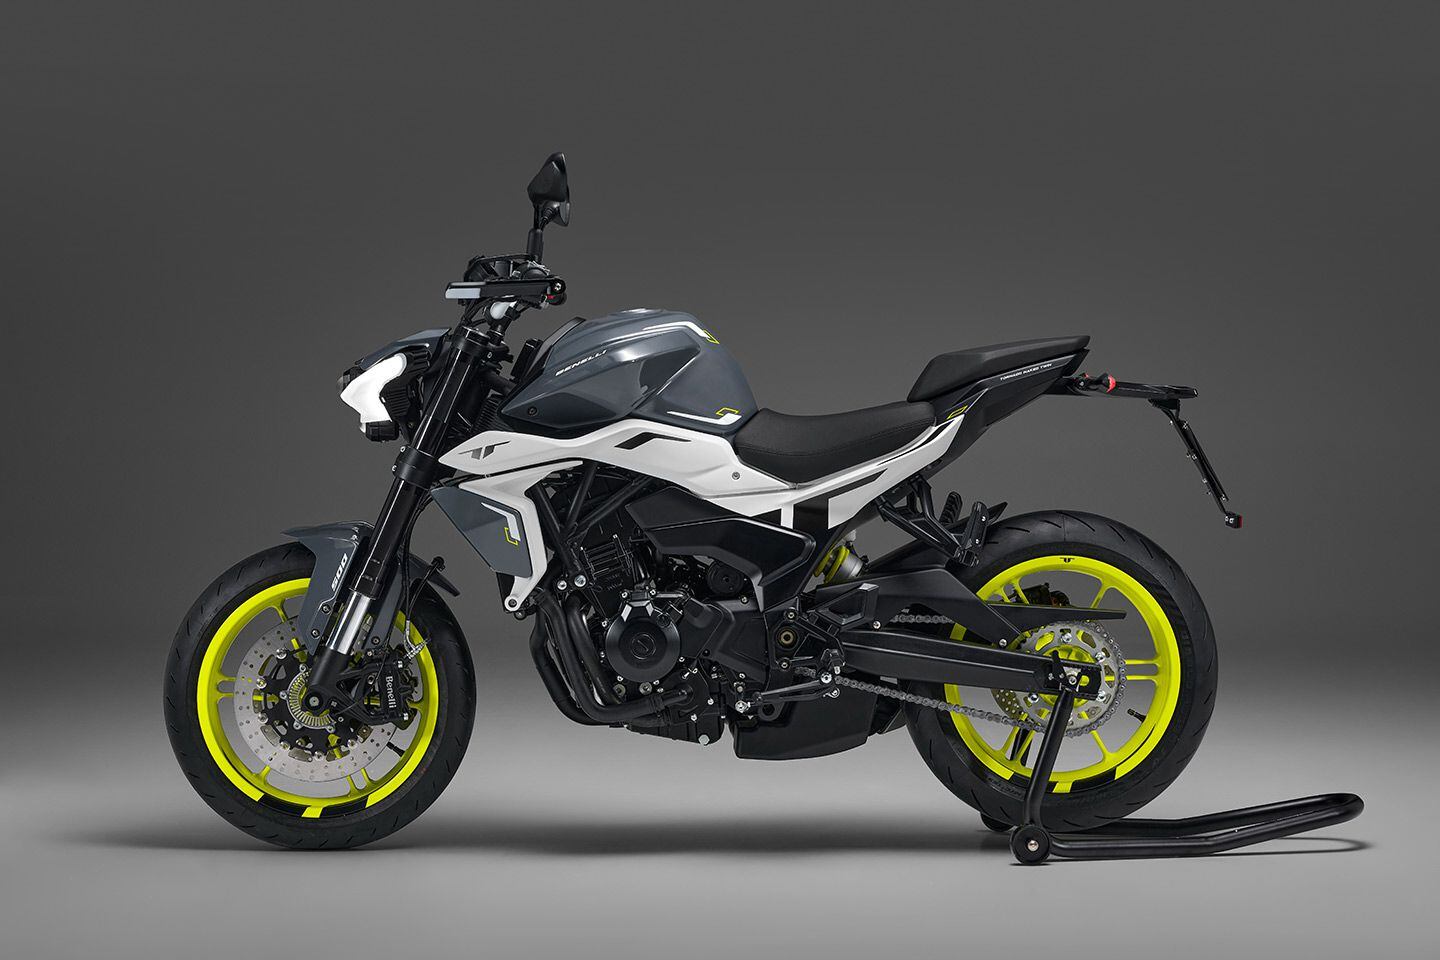 There will also be a naked version of the bike called the Tornado Naked Twin 500.